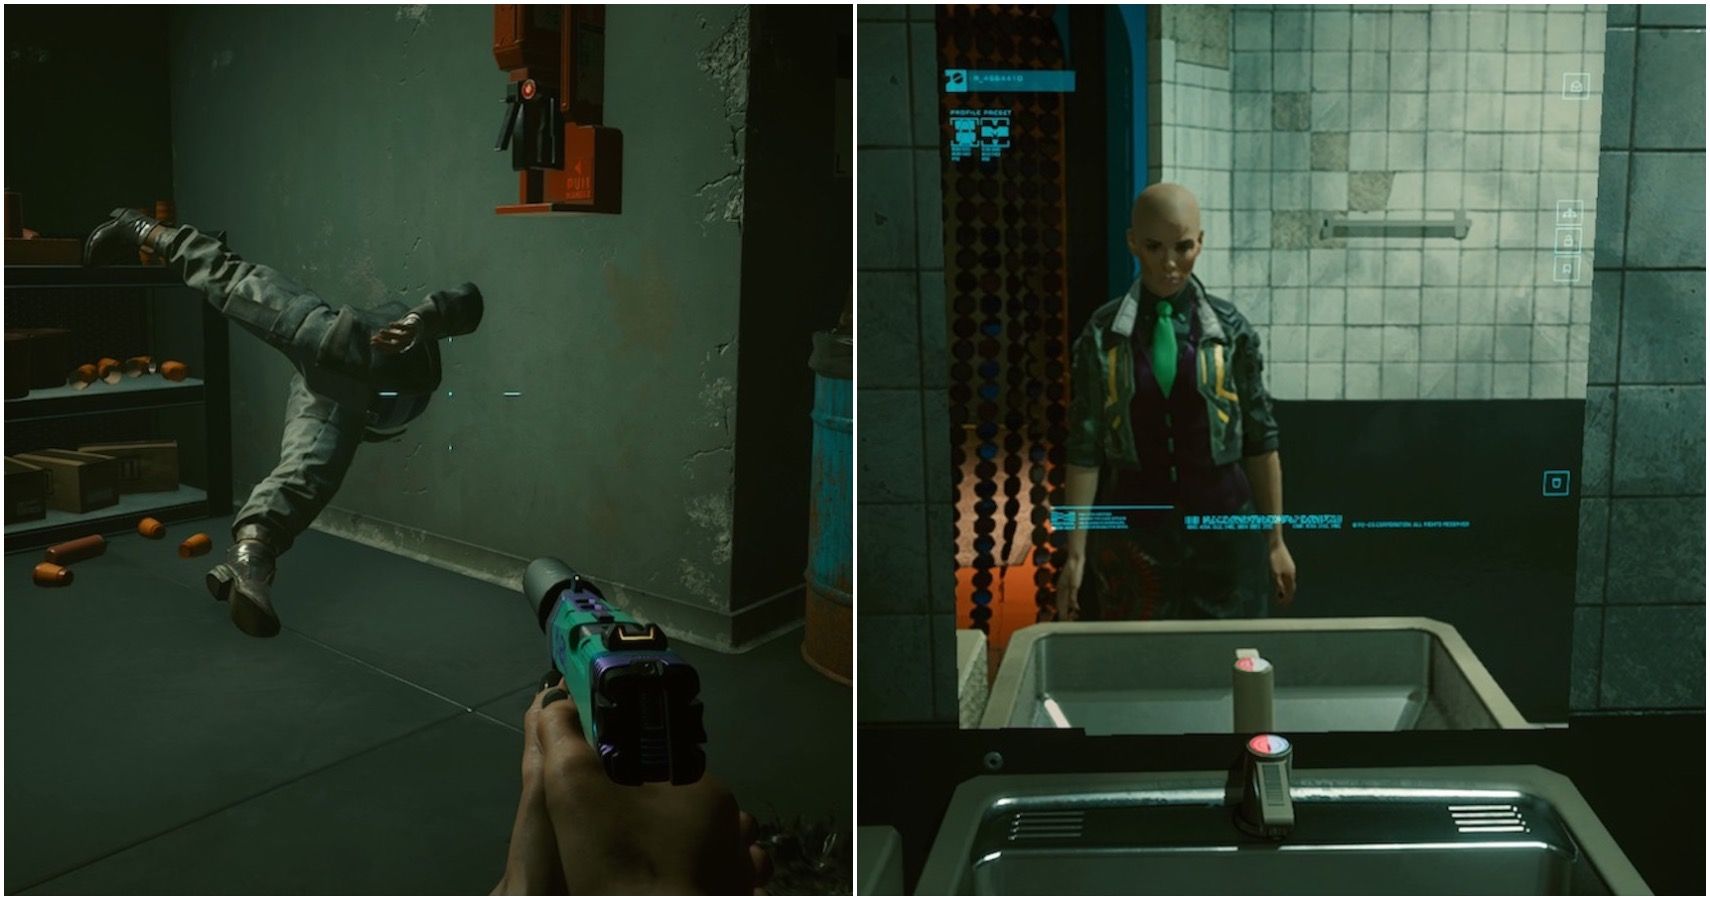 Cyberpunk 2077 enemy clipping and bald looking in mirror